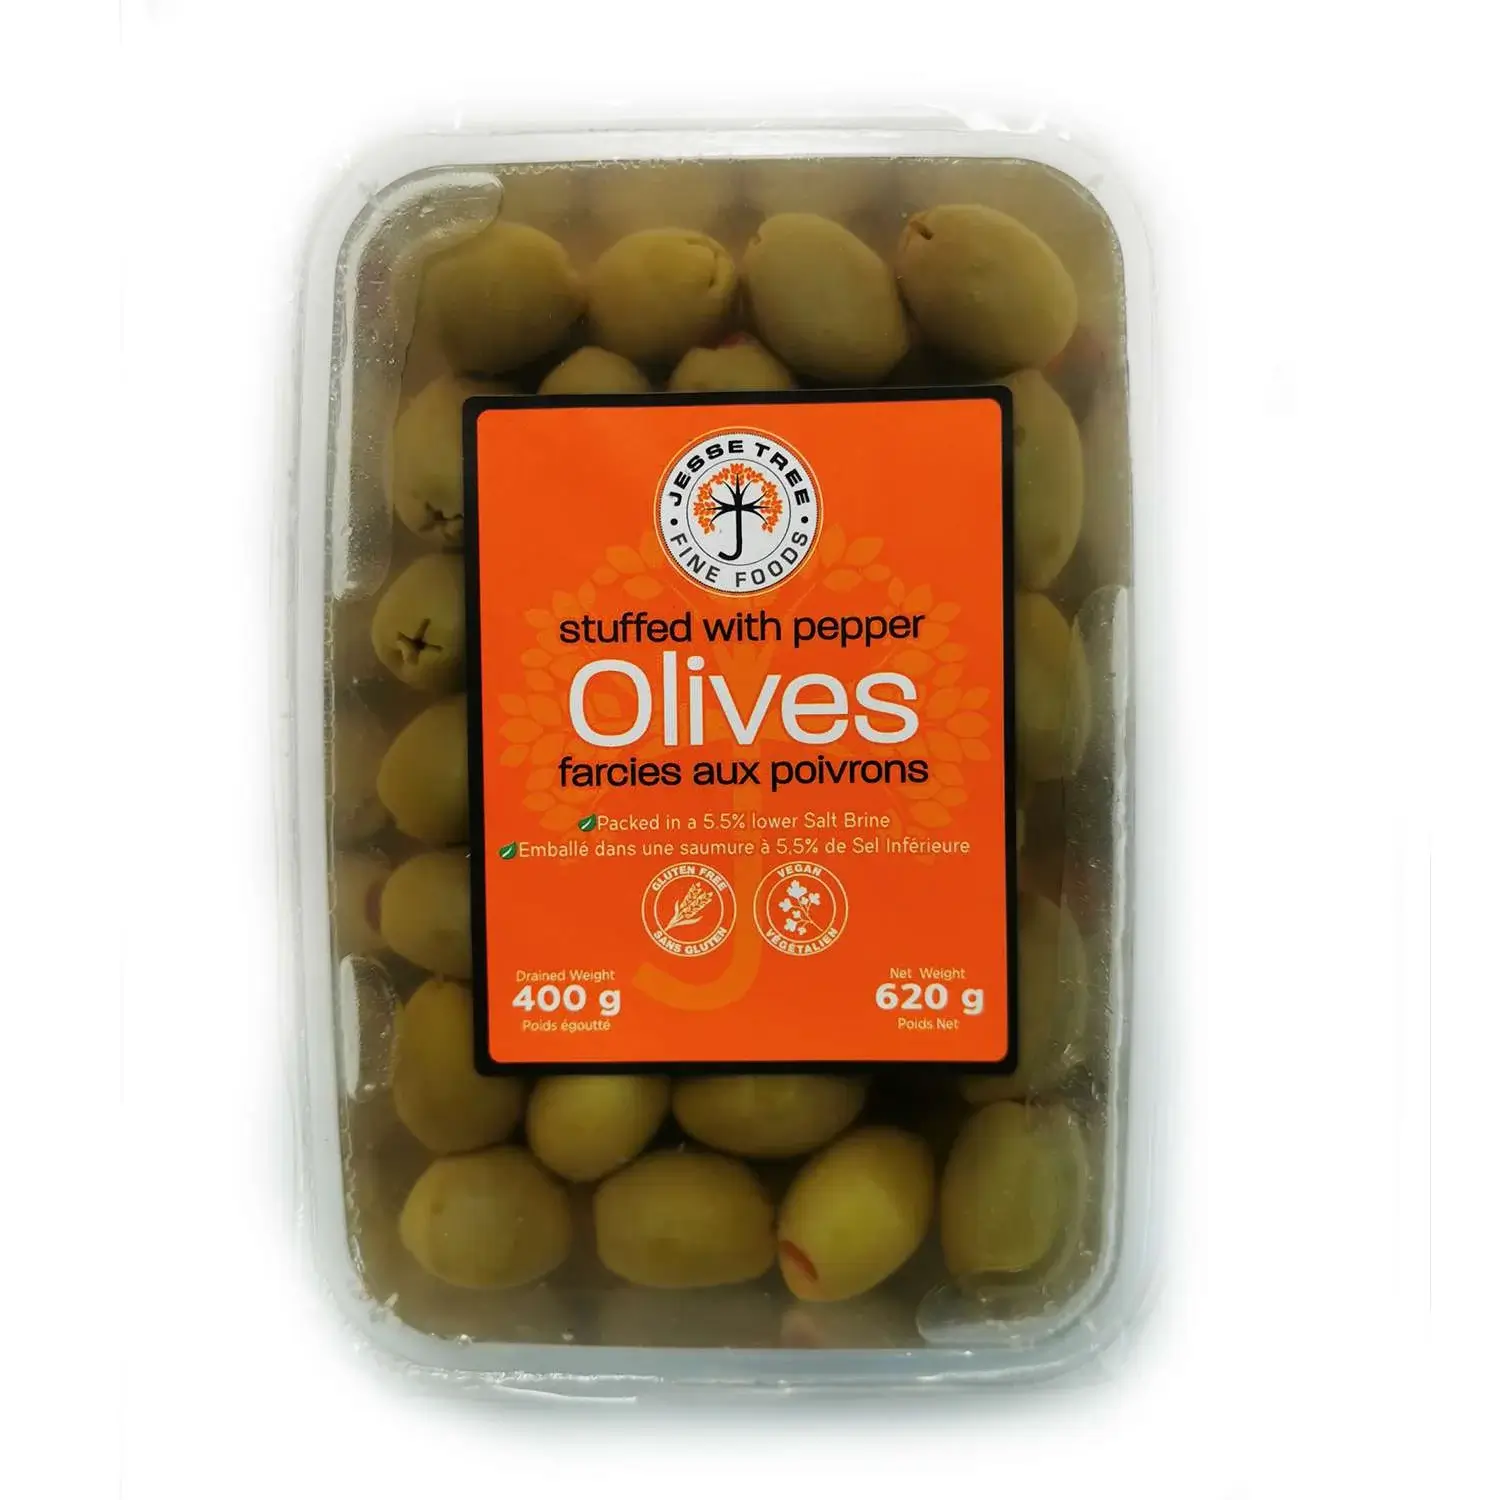 Green Olives Stuffed with Pepper